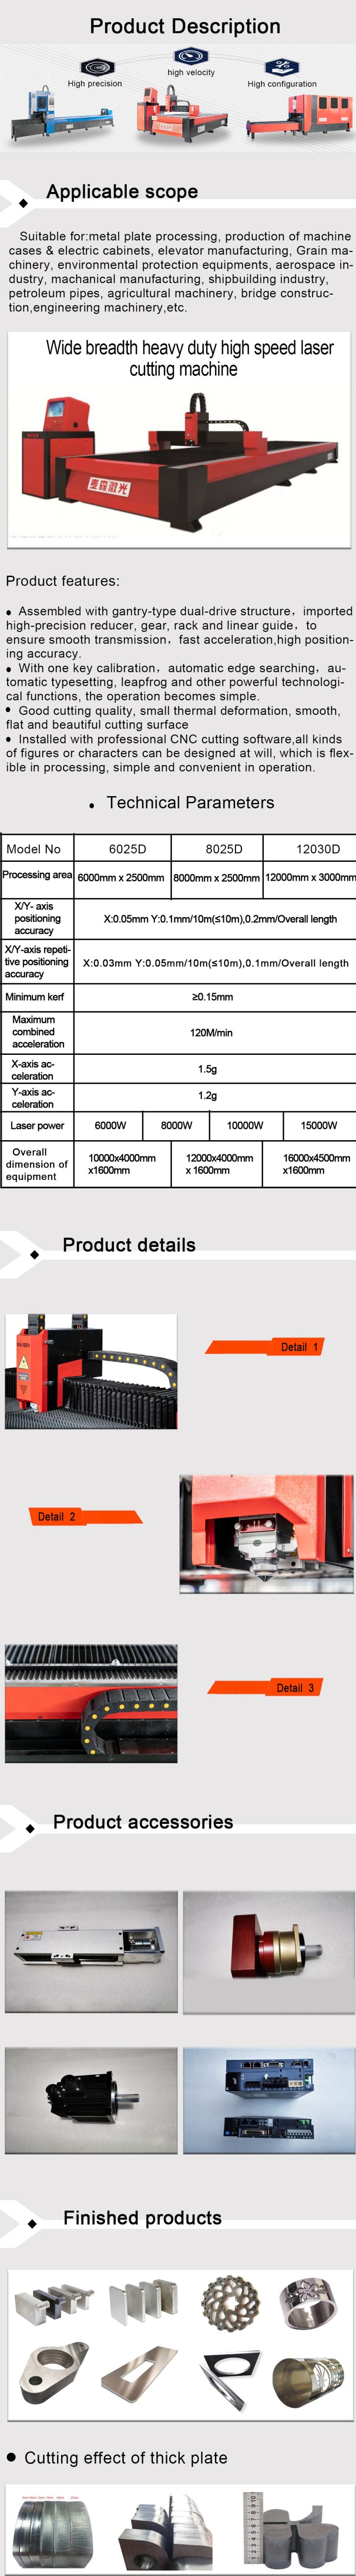 Wide Breadth Heavy Duty High Speed Laser Cutting Machine Assembled with Gantry-Type Dual-Drive Structure